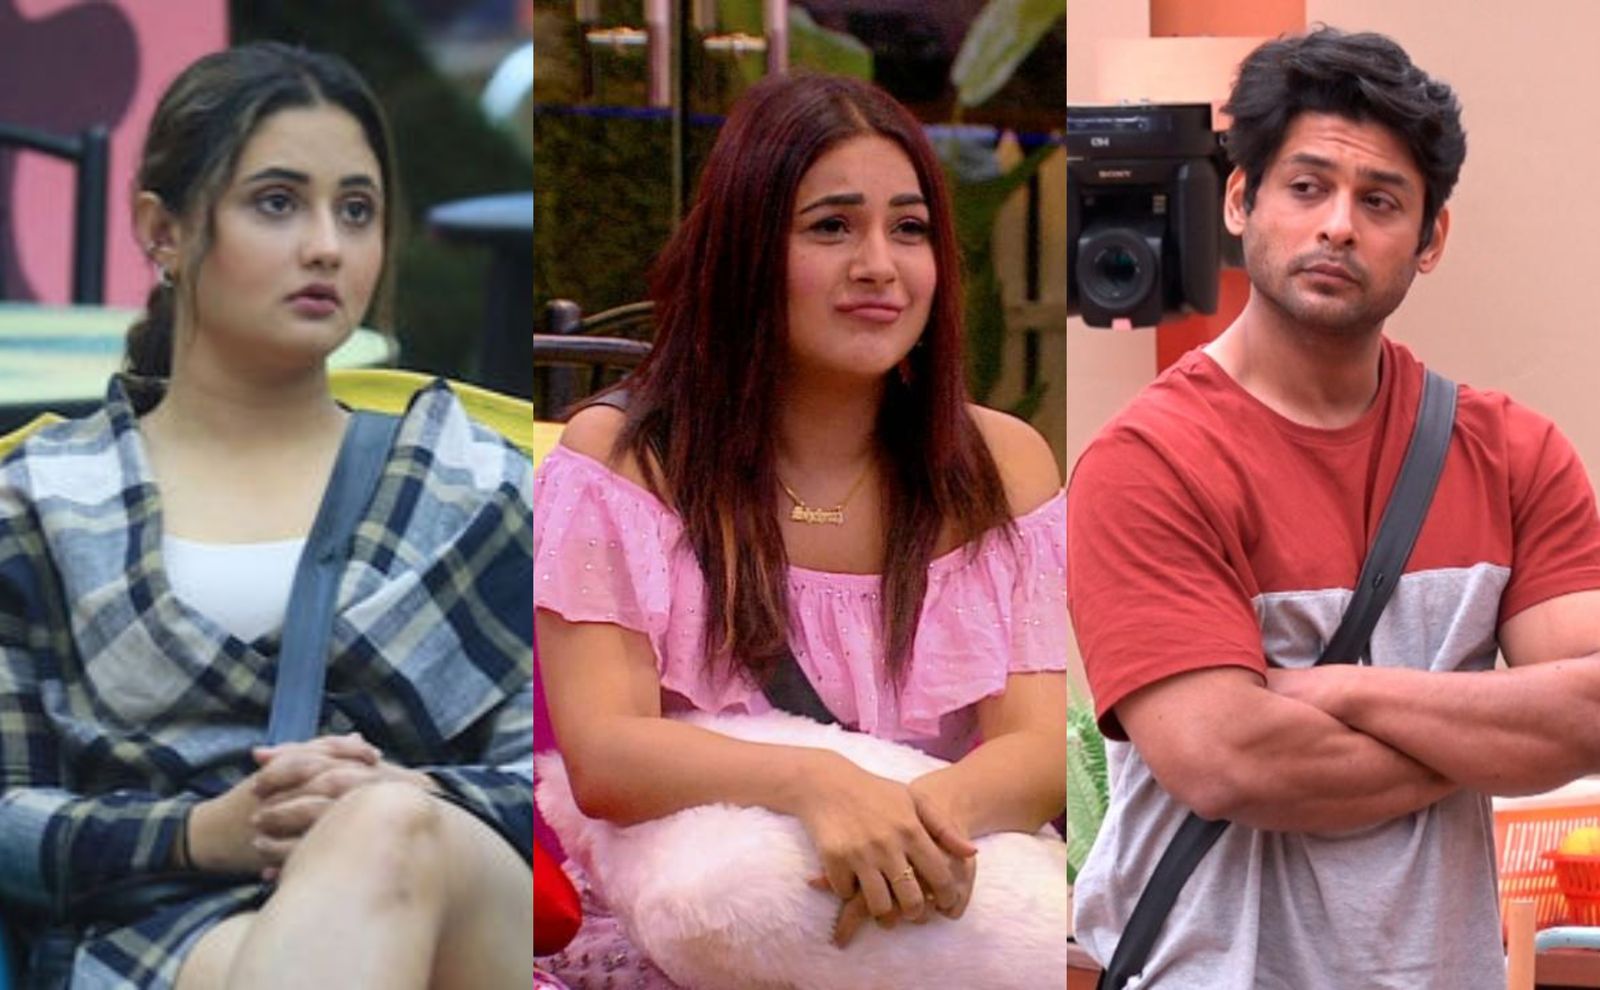 Bigg Boss 13 Preview: Rashami Desai Suggests Shehnaaz Gill To Focus On Her Game, Not On Sidharth Shukla